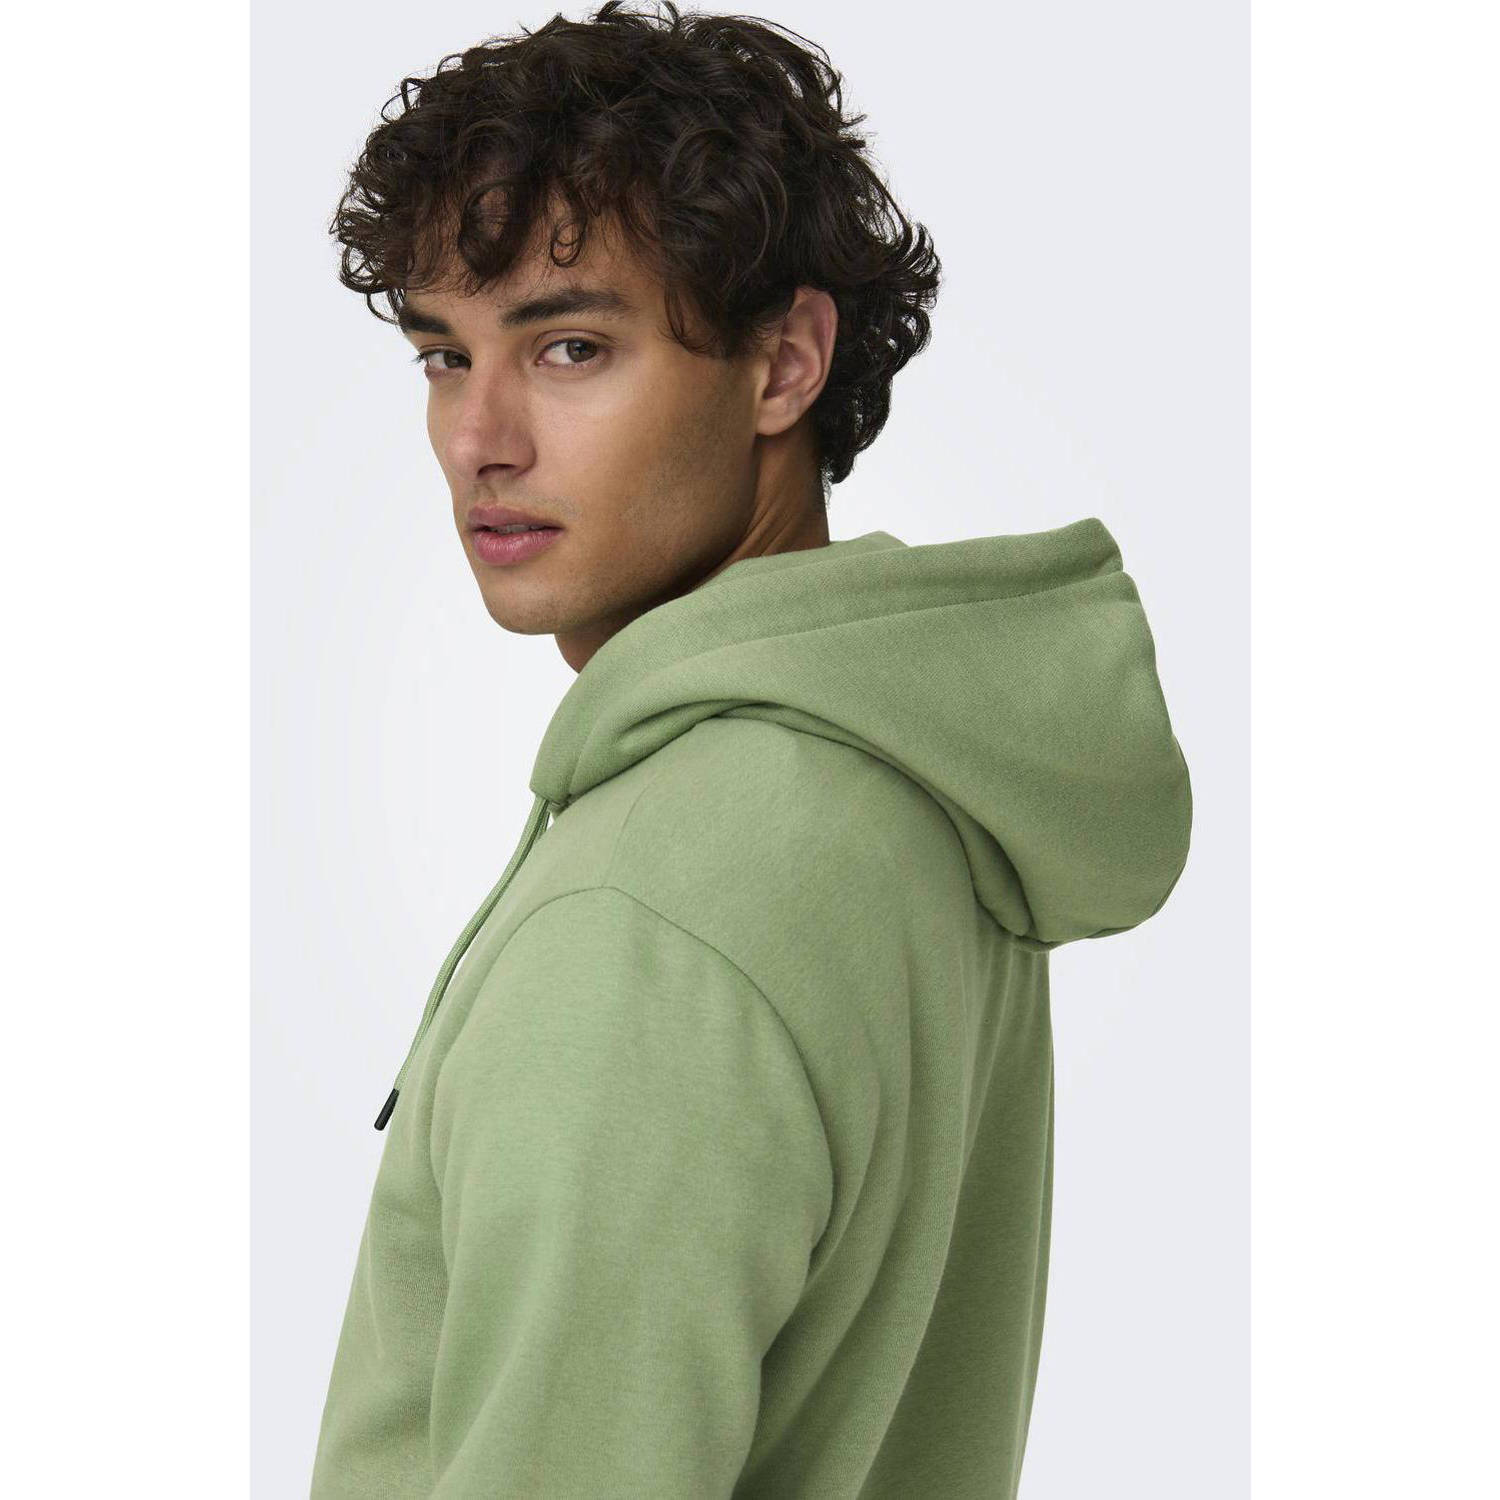 ONLY & SONS hoodie ONSCERES hedge green